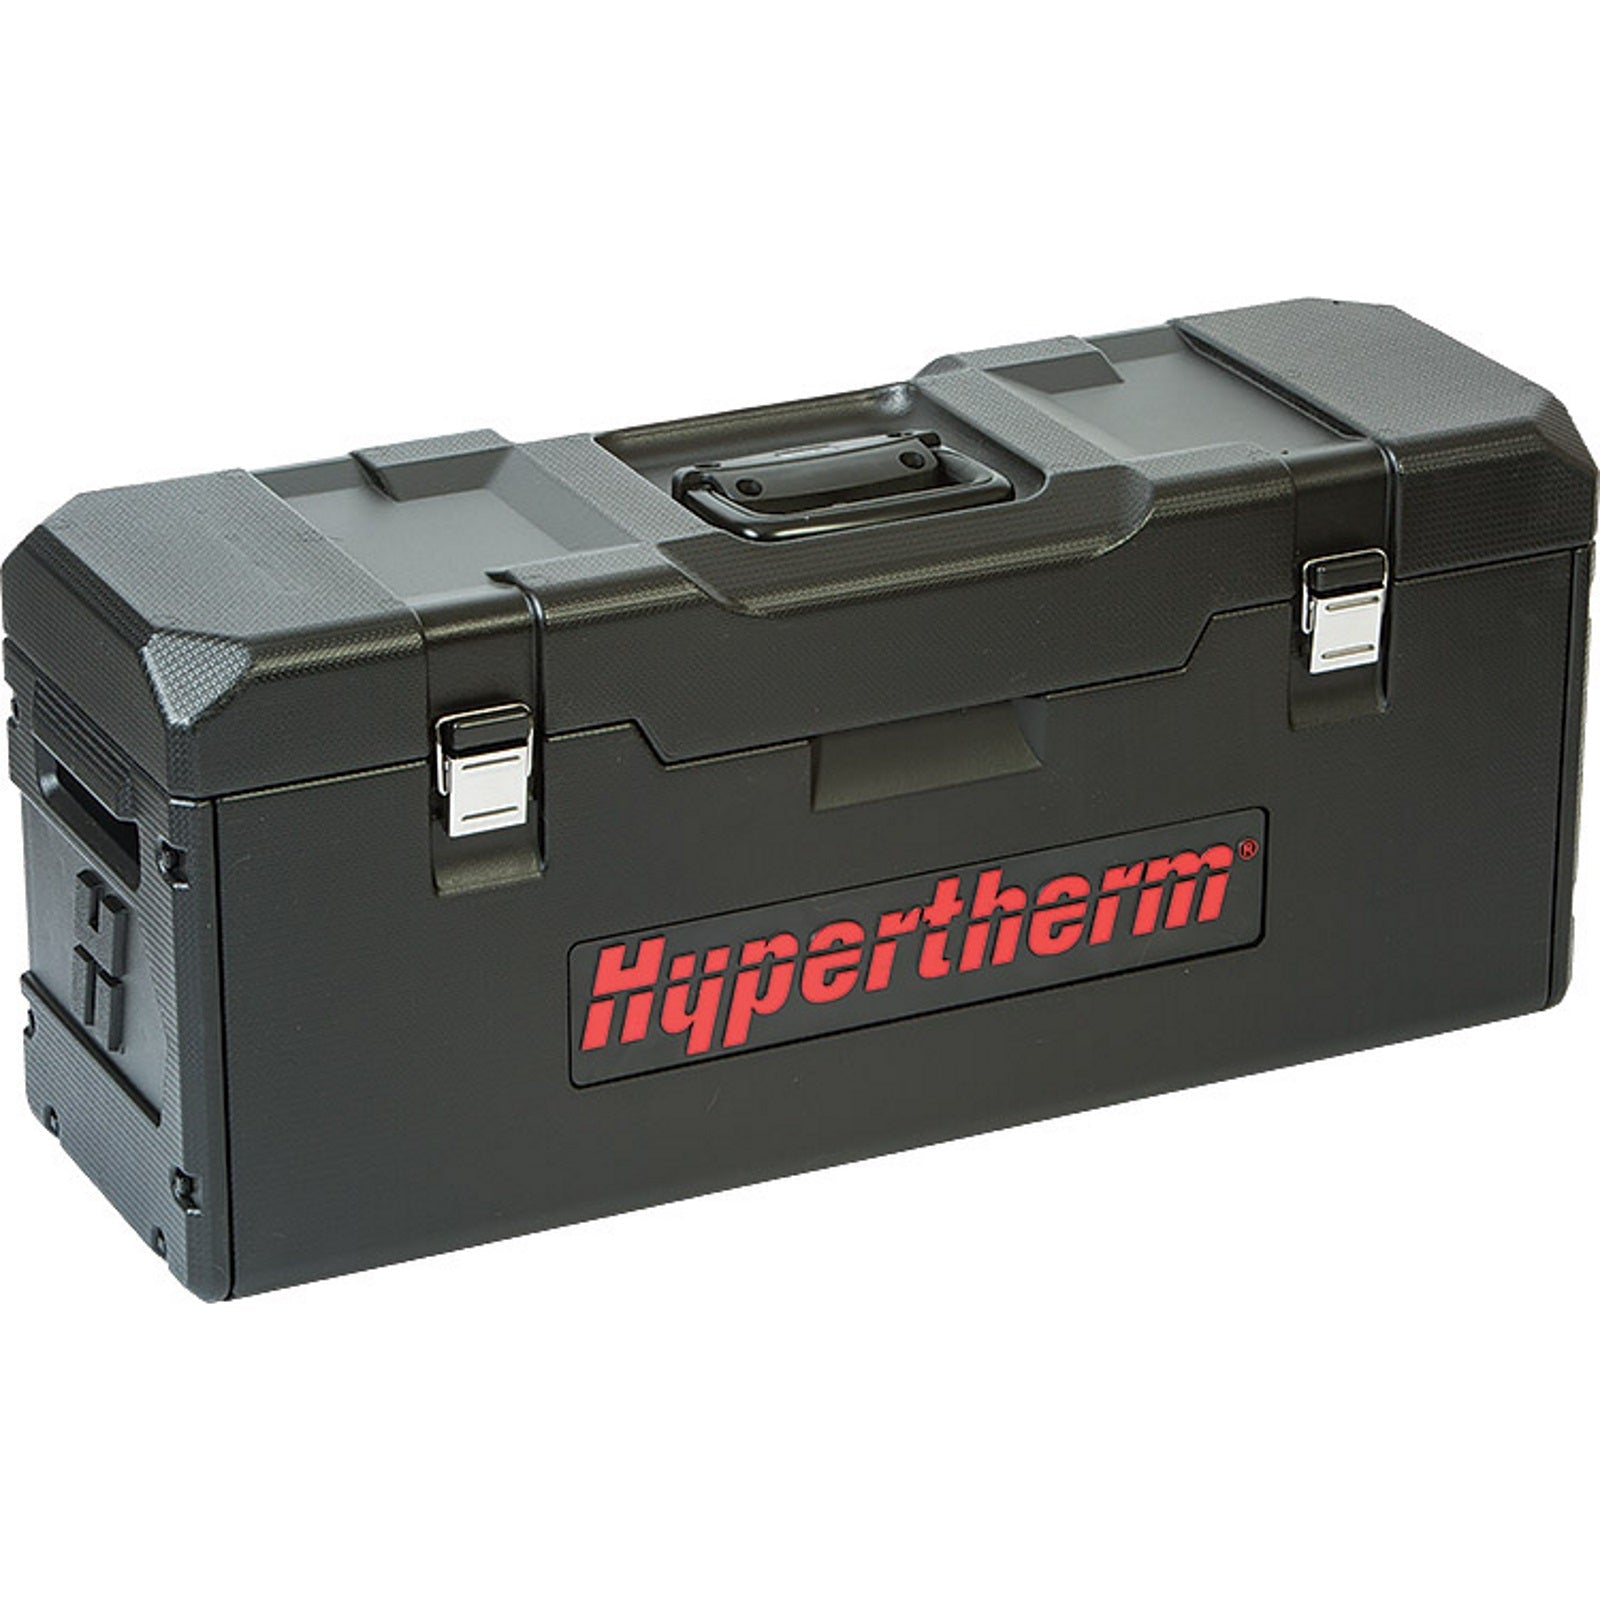 Hypertherm Powermax 30 XP with 15ft Torch and Consumables Pkg (088079)